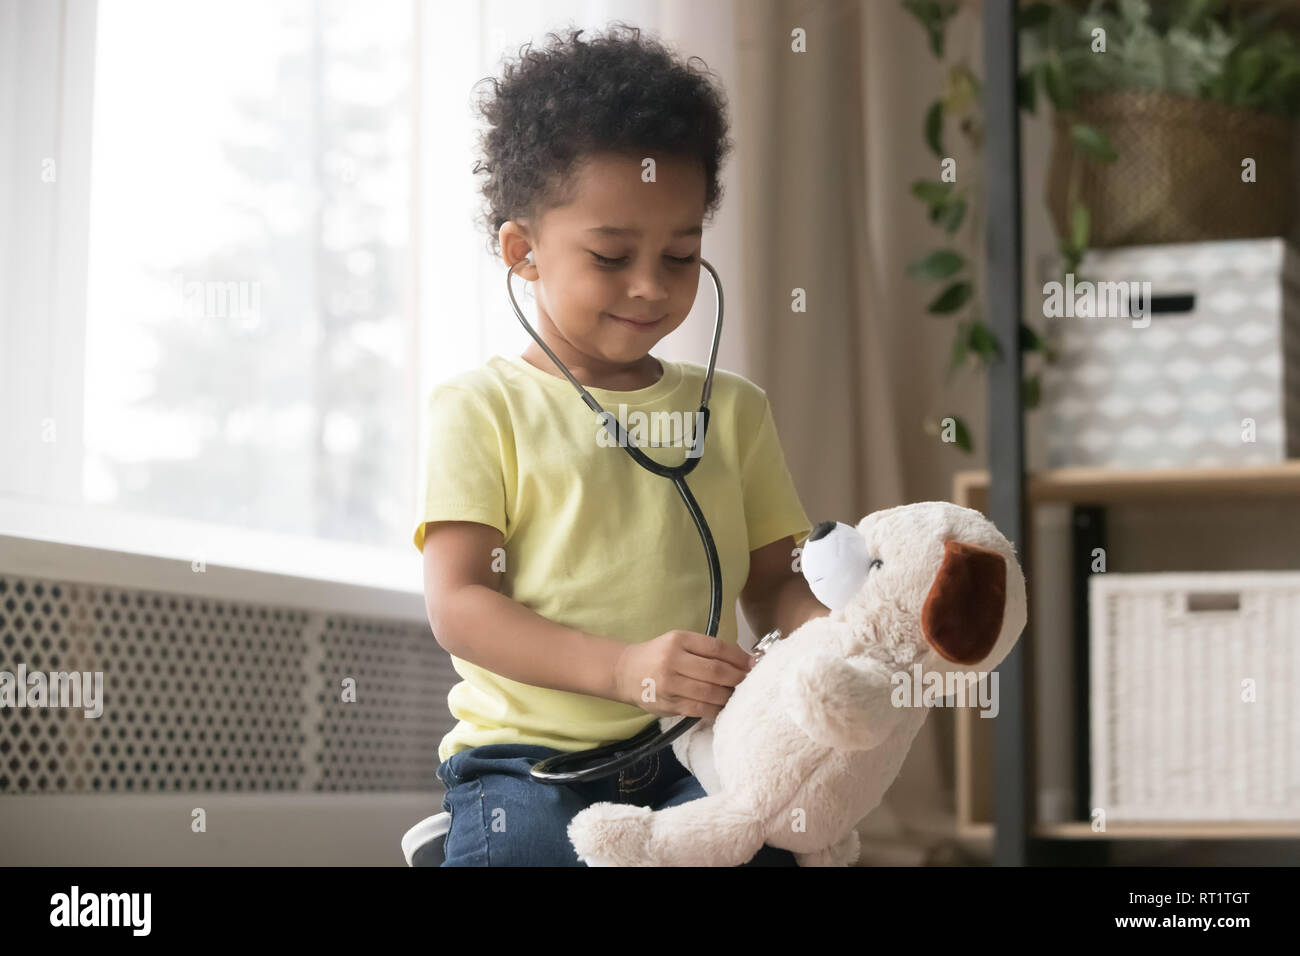 Cute african boy playing with toy comme doctor holding stethoscope Banque D'Images